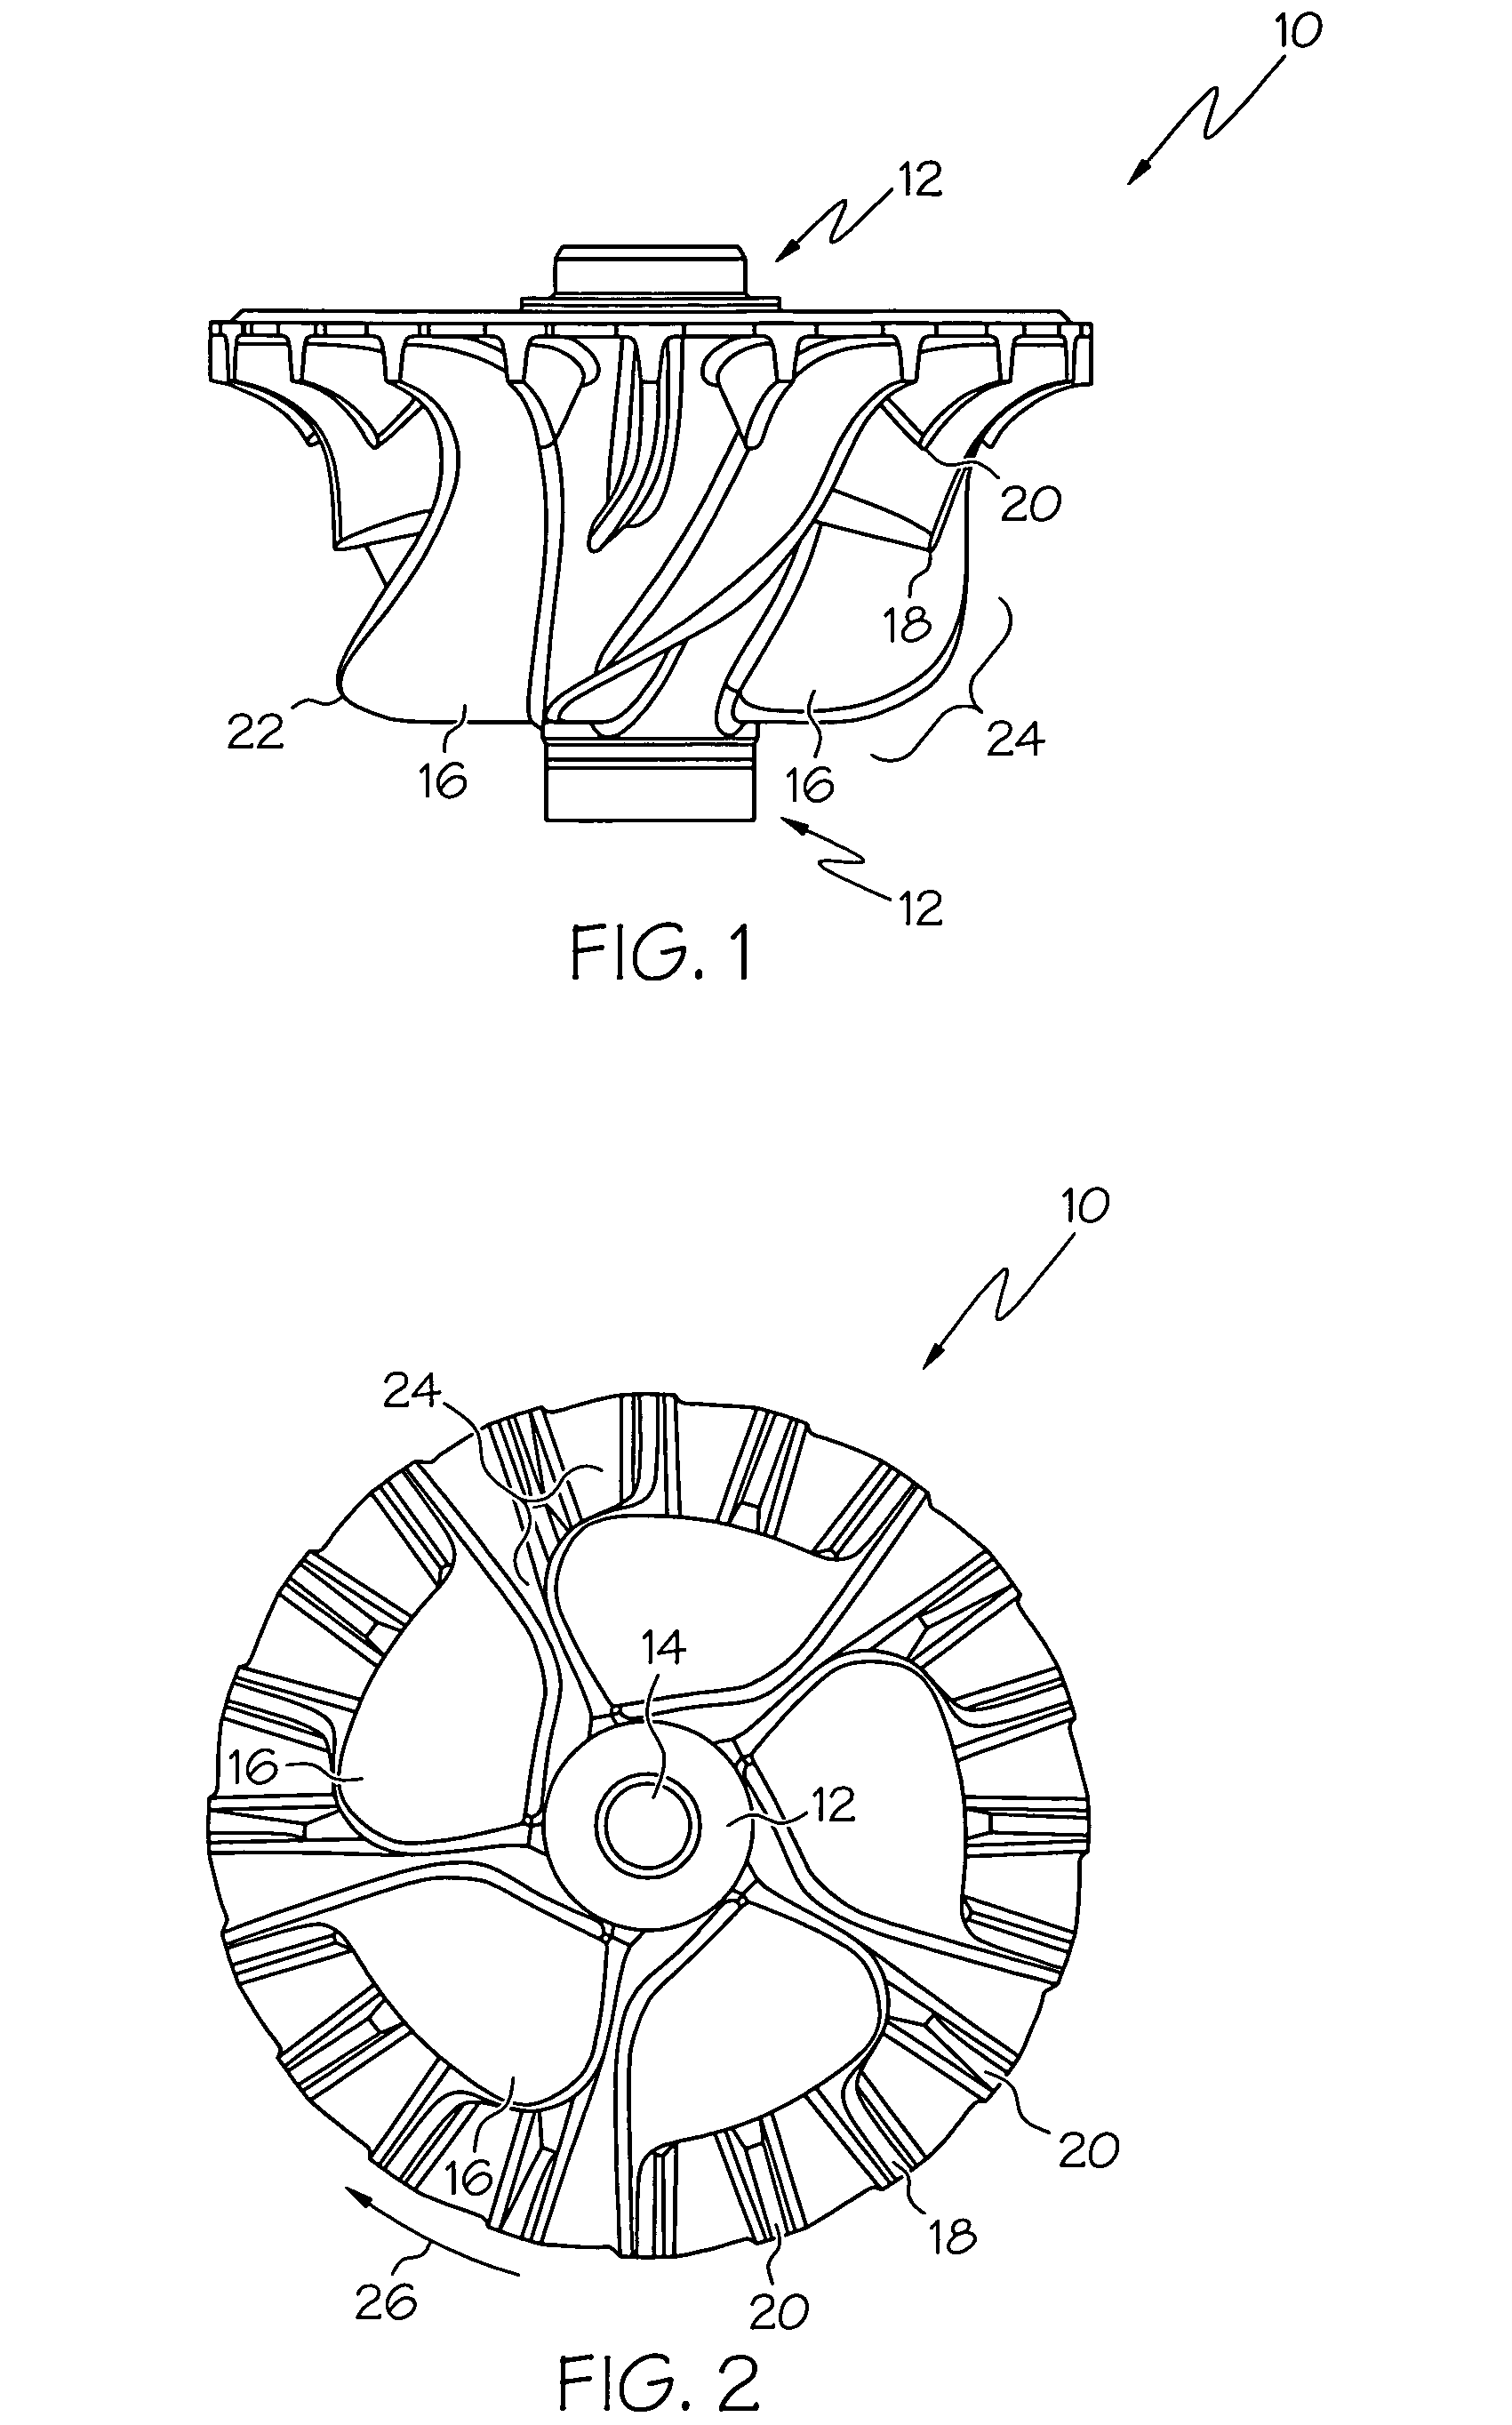 Radial turbine wheel with locally curved trailing edge tip